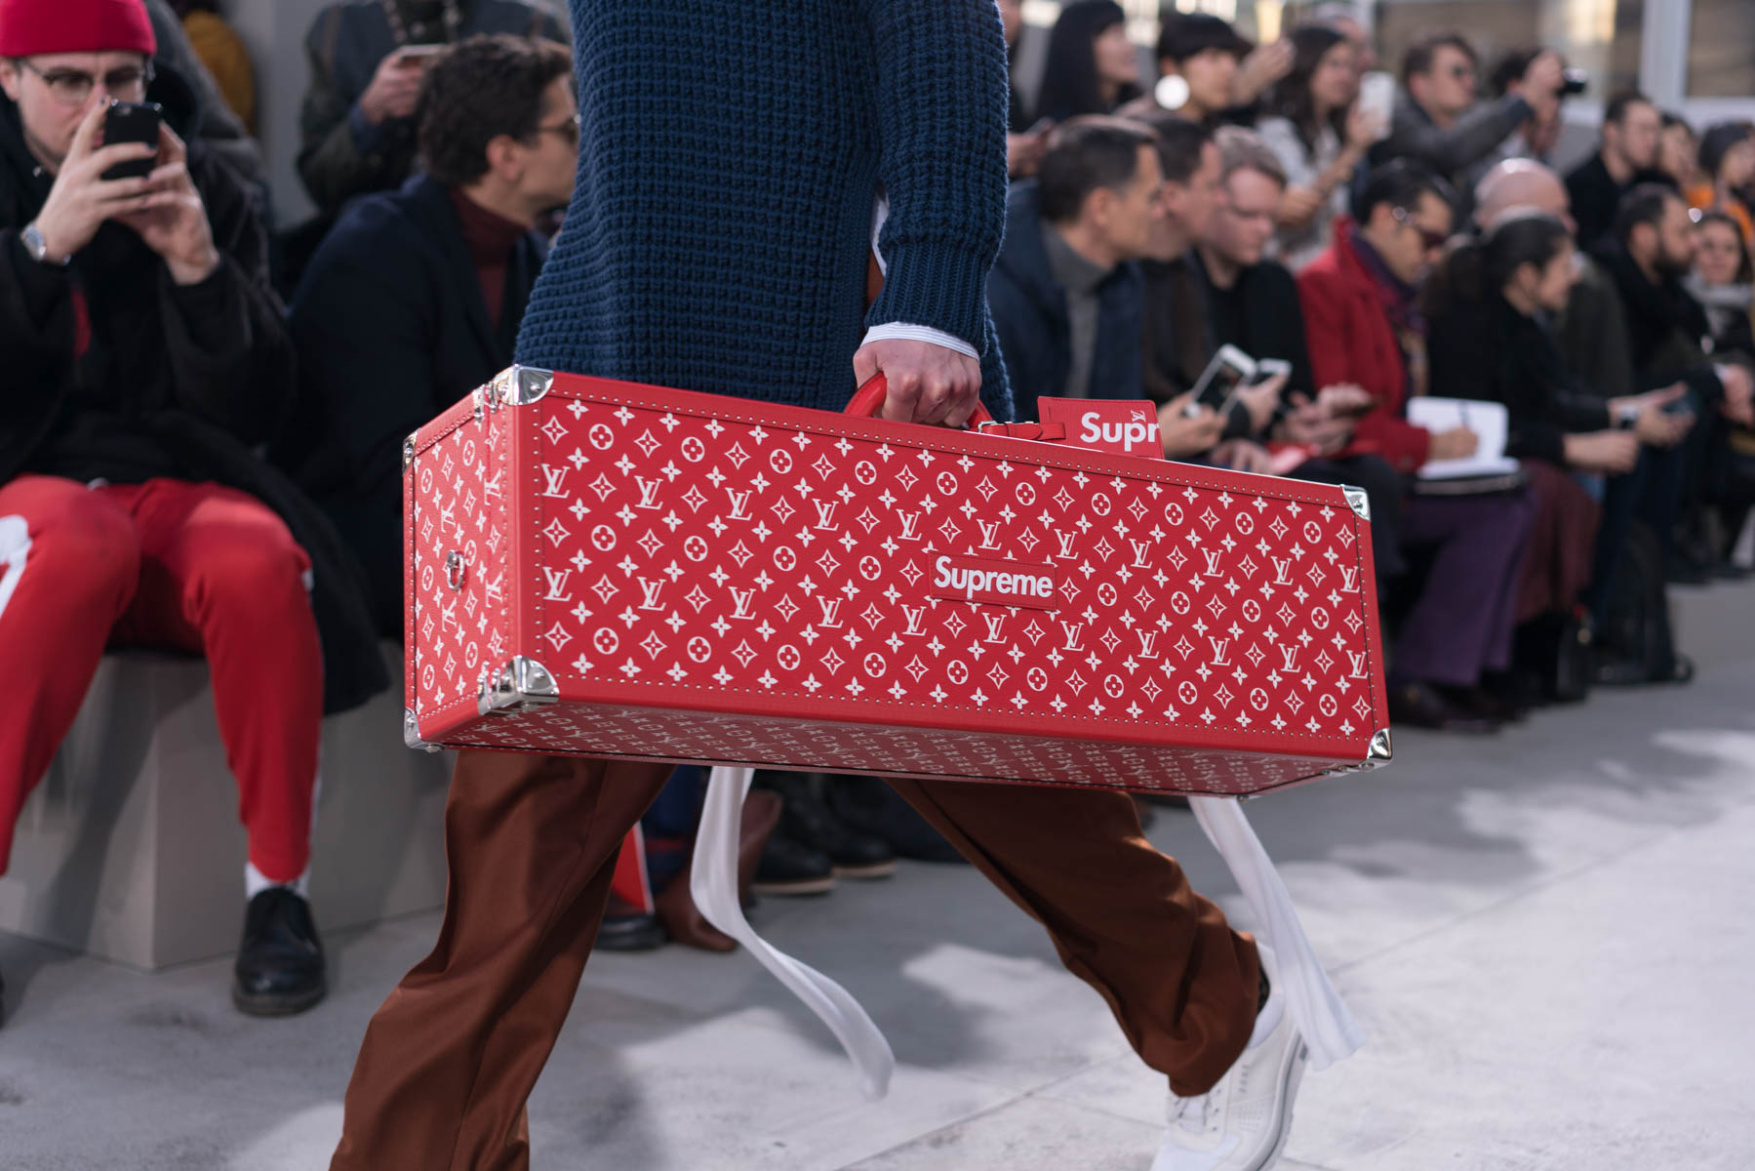 The Supreme x Louis Vuitton Collab Is Here But, Is It Worth It